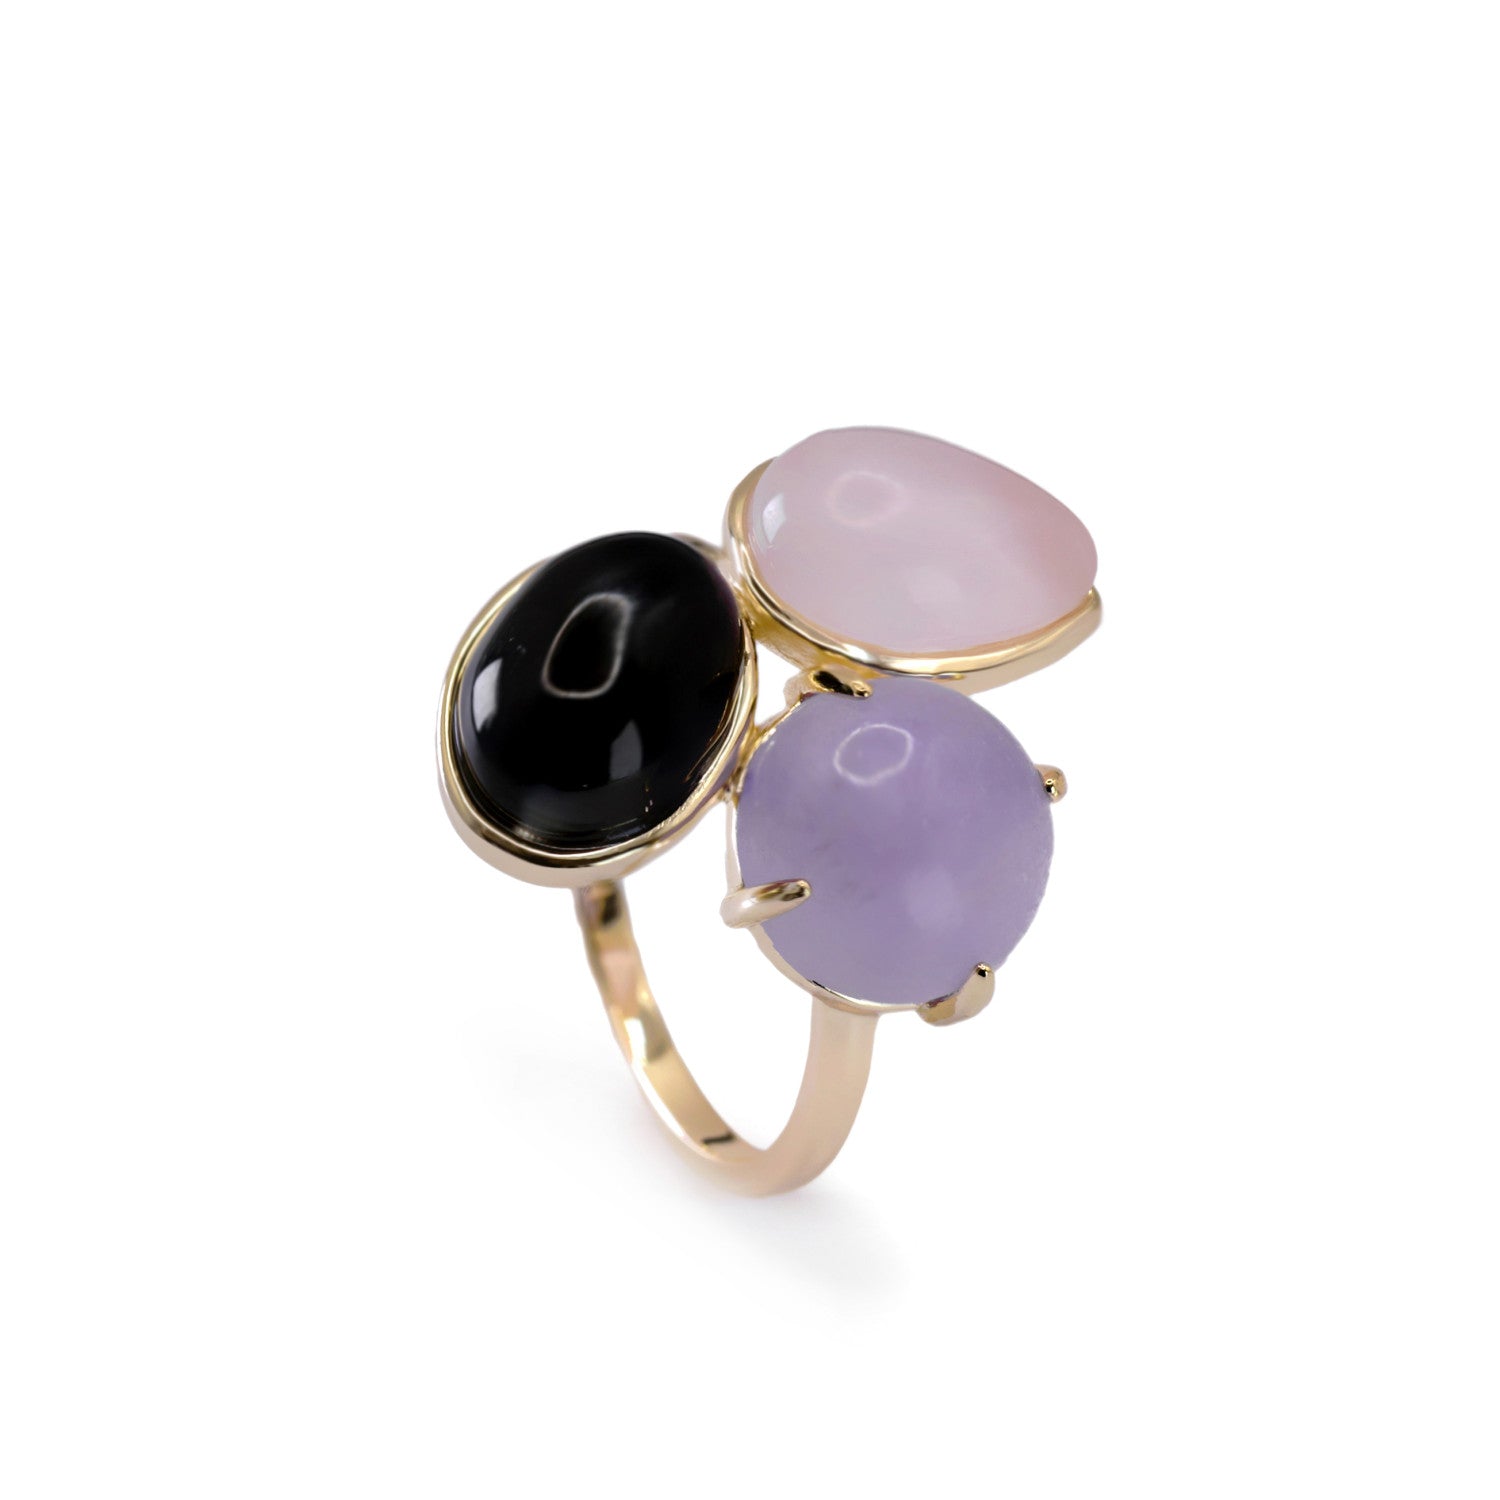 Rings with silver stones in purple tones